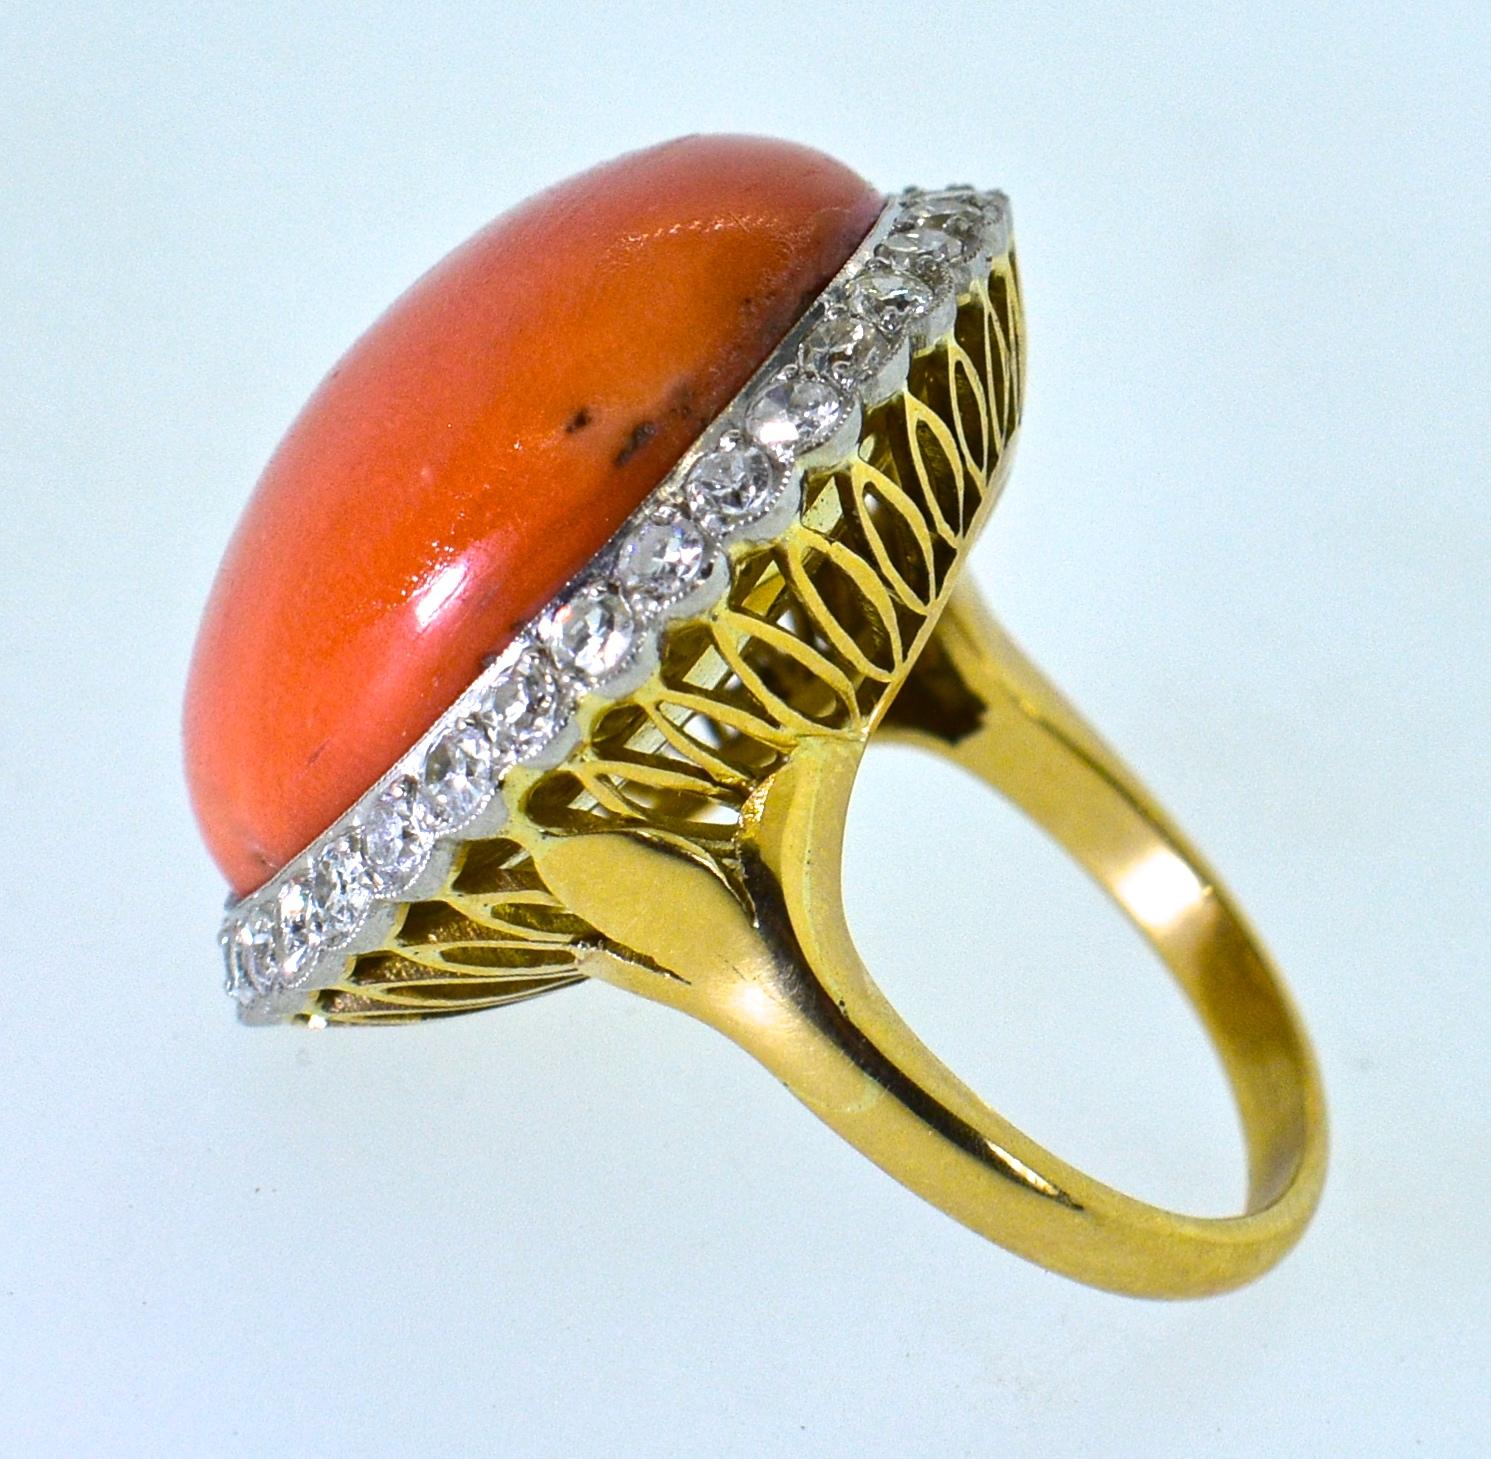 Natural Mediterranean  coral surrounded by white diamonds.  There are approximately 1.5 cts. of round diamonds all near colorless, H, and very slightly included.  The gallery work underneath is done quite well.  The natural coral weighs